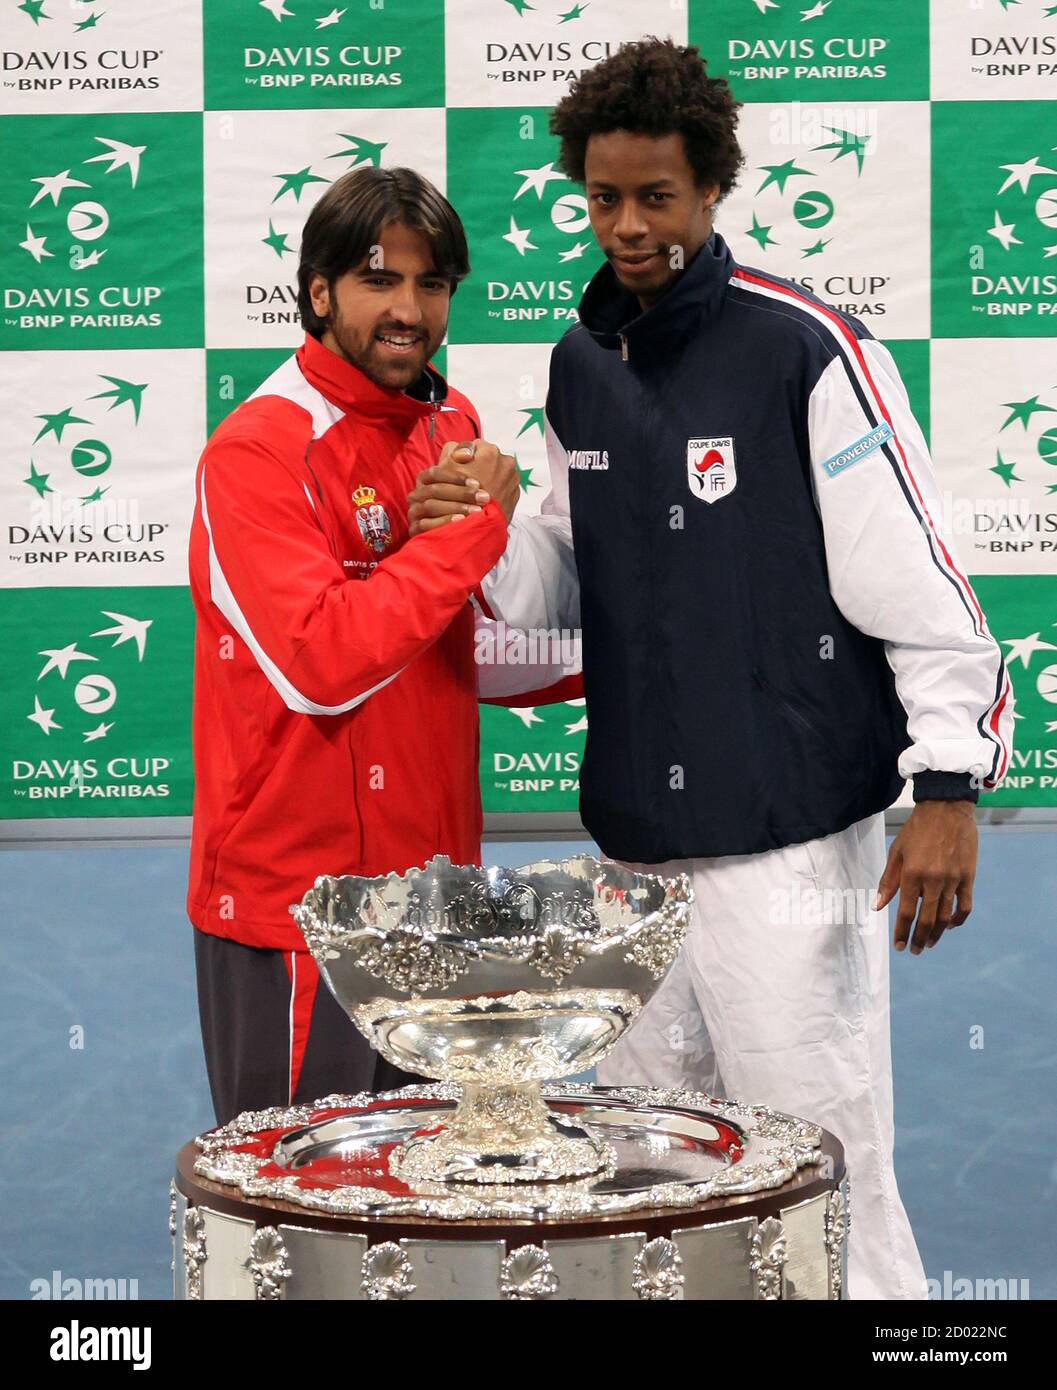 Serbia's Janko Tipsarevic (L) and France's Gael Monfils pose with the Davis Cup trophy after the official draw at Belgrade Arena in Belgrade December 2, 2010. Serbia and France will play their Davis Cup final tennis match from December 3-5 in Belgrade. REUTERS/Marko Djurica (SERBIA - Tags: SPORT TENNIS) Stock Photo